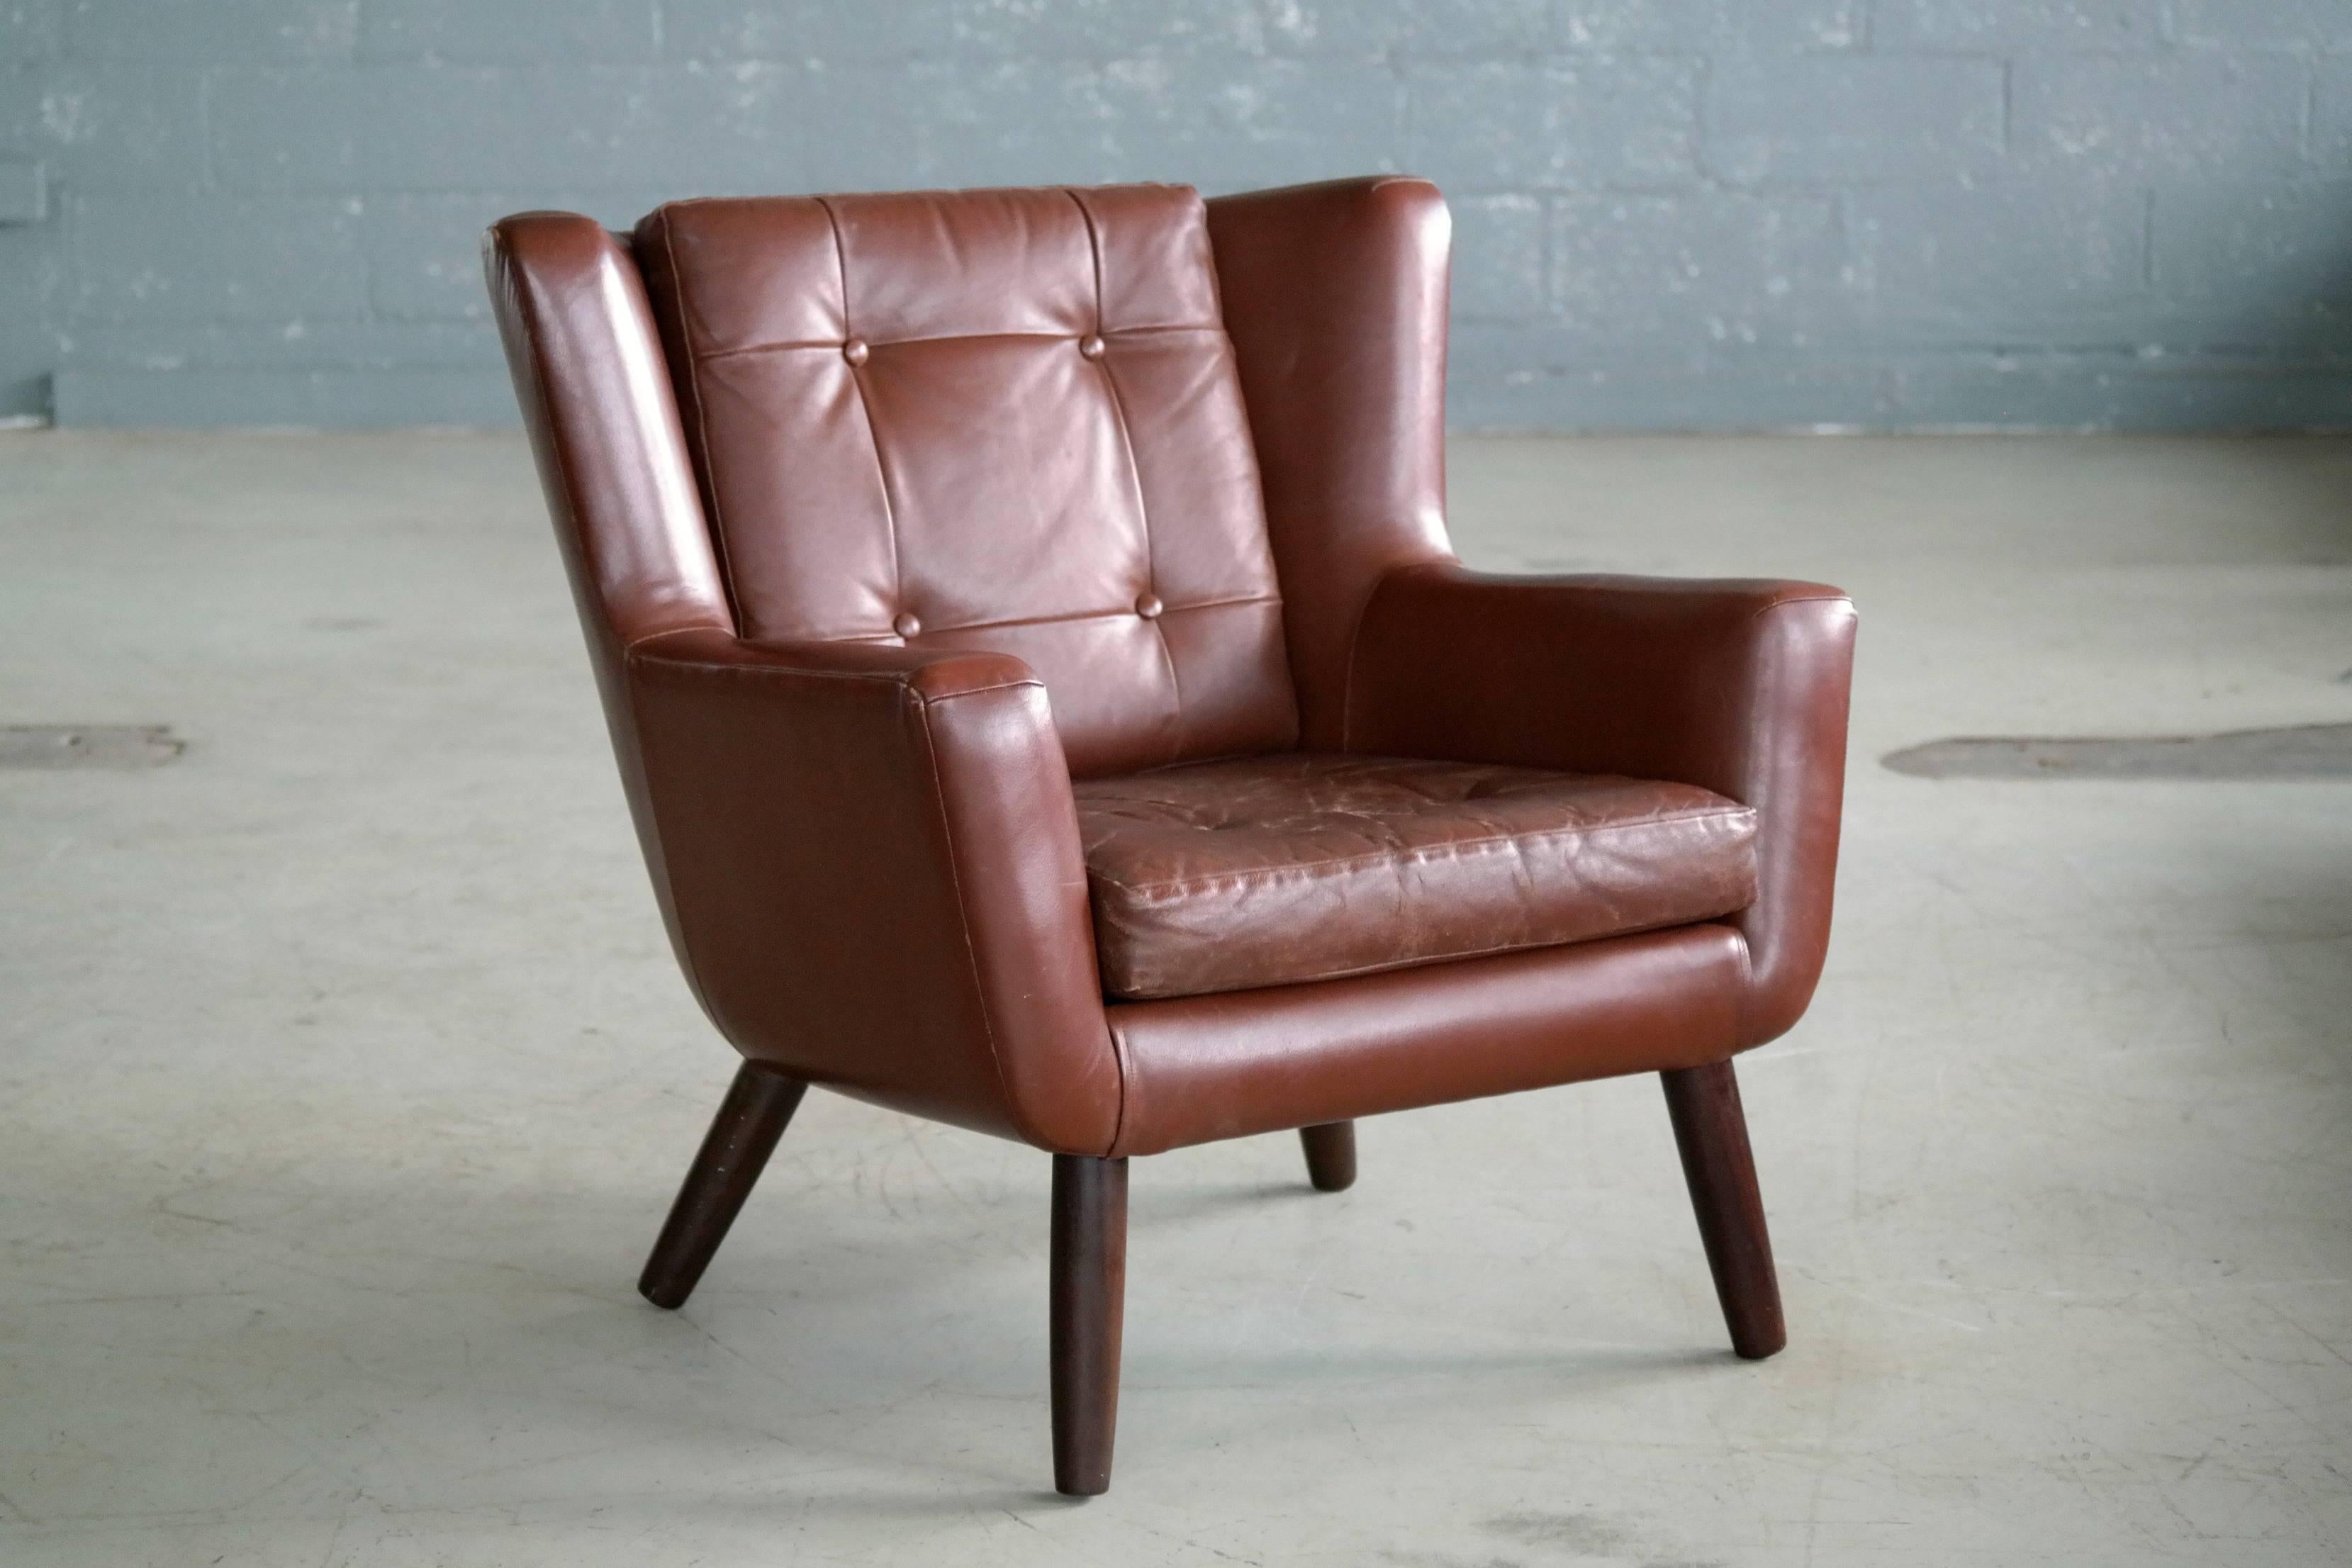 Very charming easy chairs in a nice warm chestnut brown colored leather with tufted back and seat cushion raised on solid teak legs made in the 1960s by Skjold Sørensen of Denmark. Skjold Sørensen had a unique and very characteristic design style